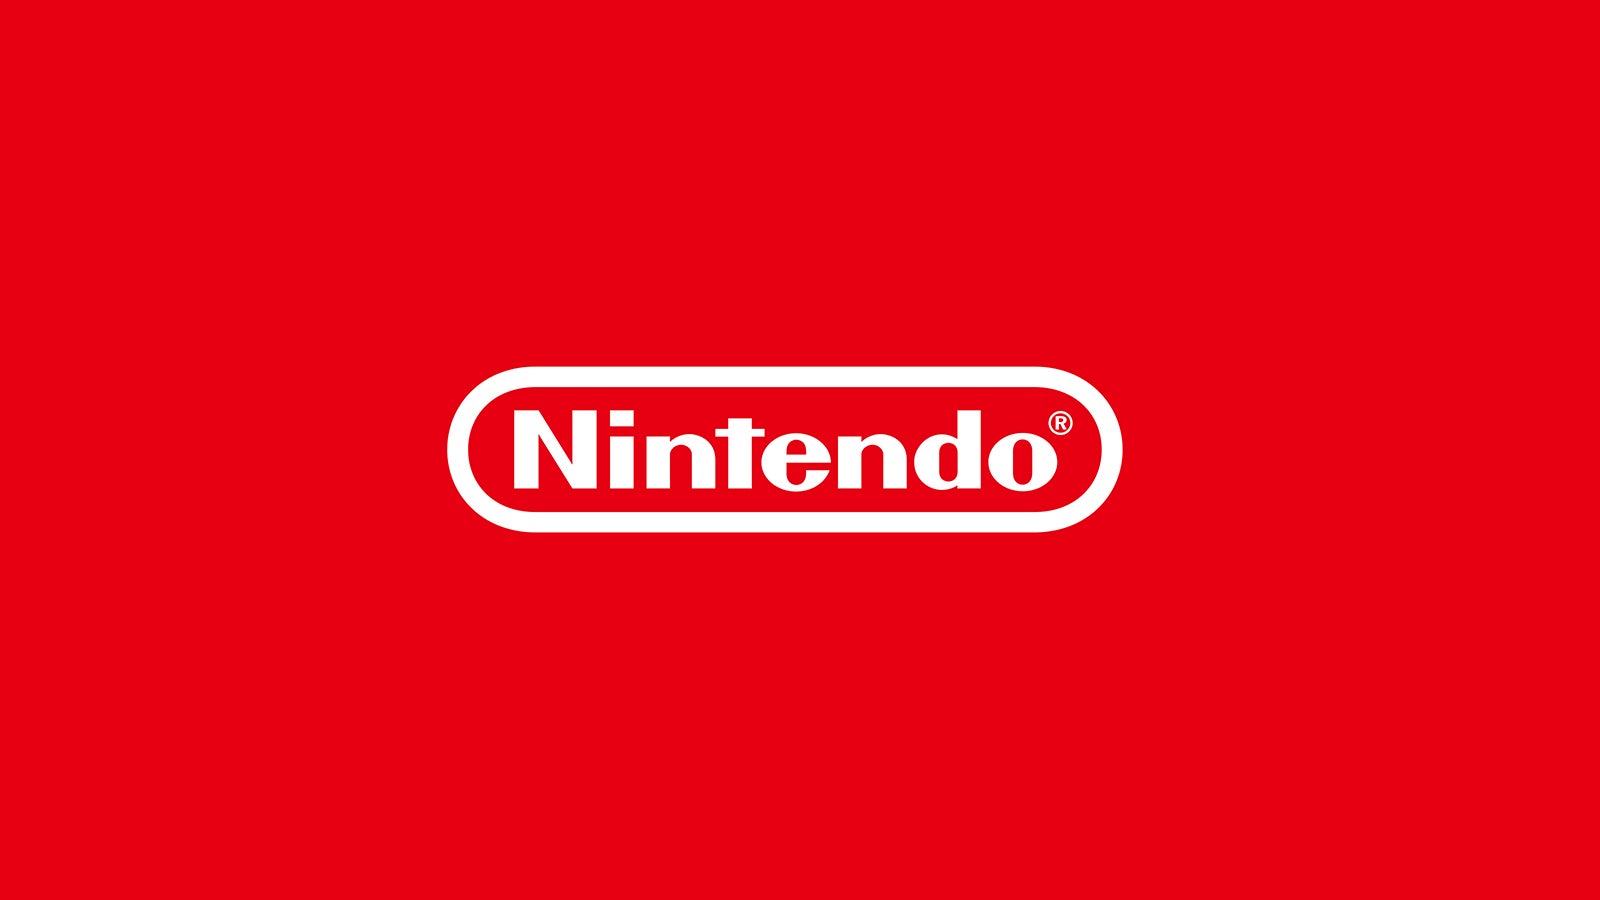 Fresh report alleges sexist workplace at Nintendo of America